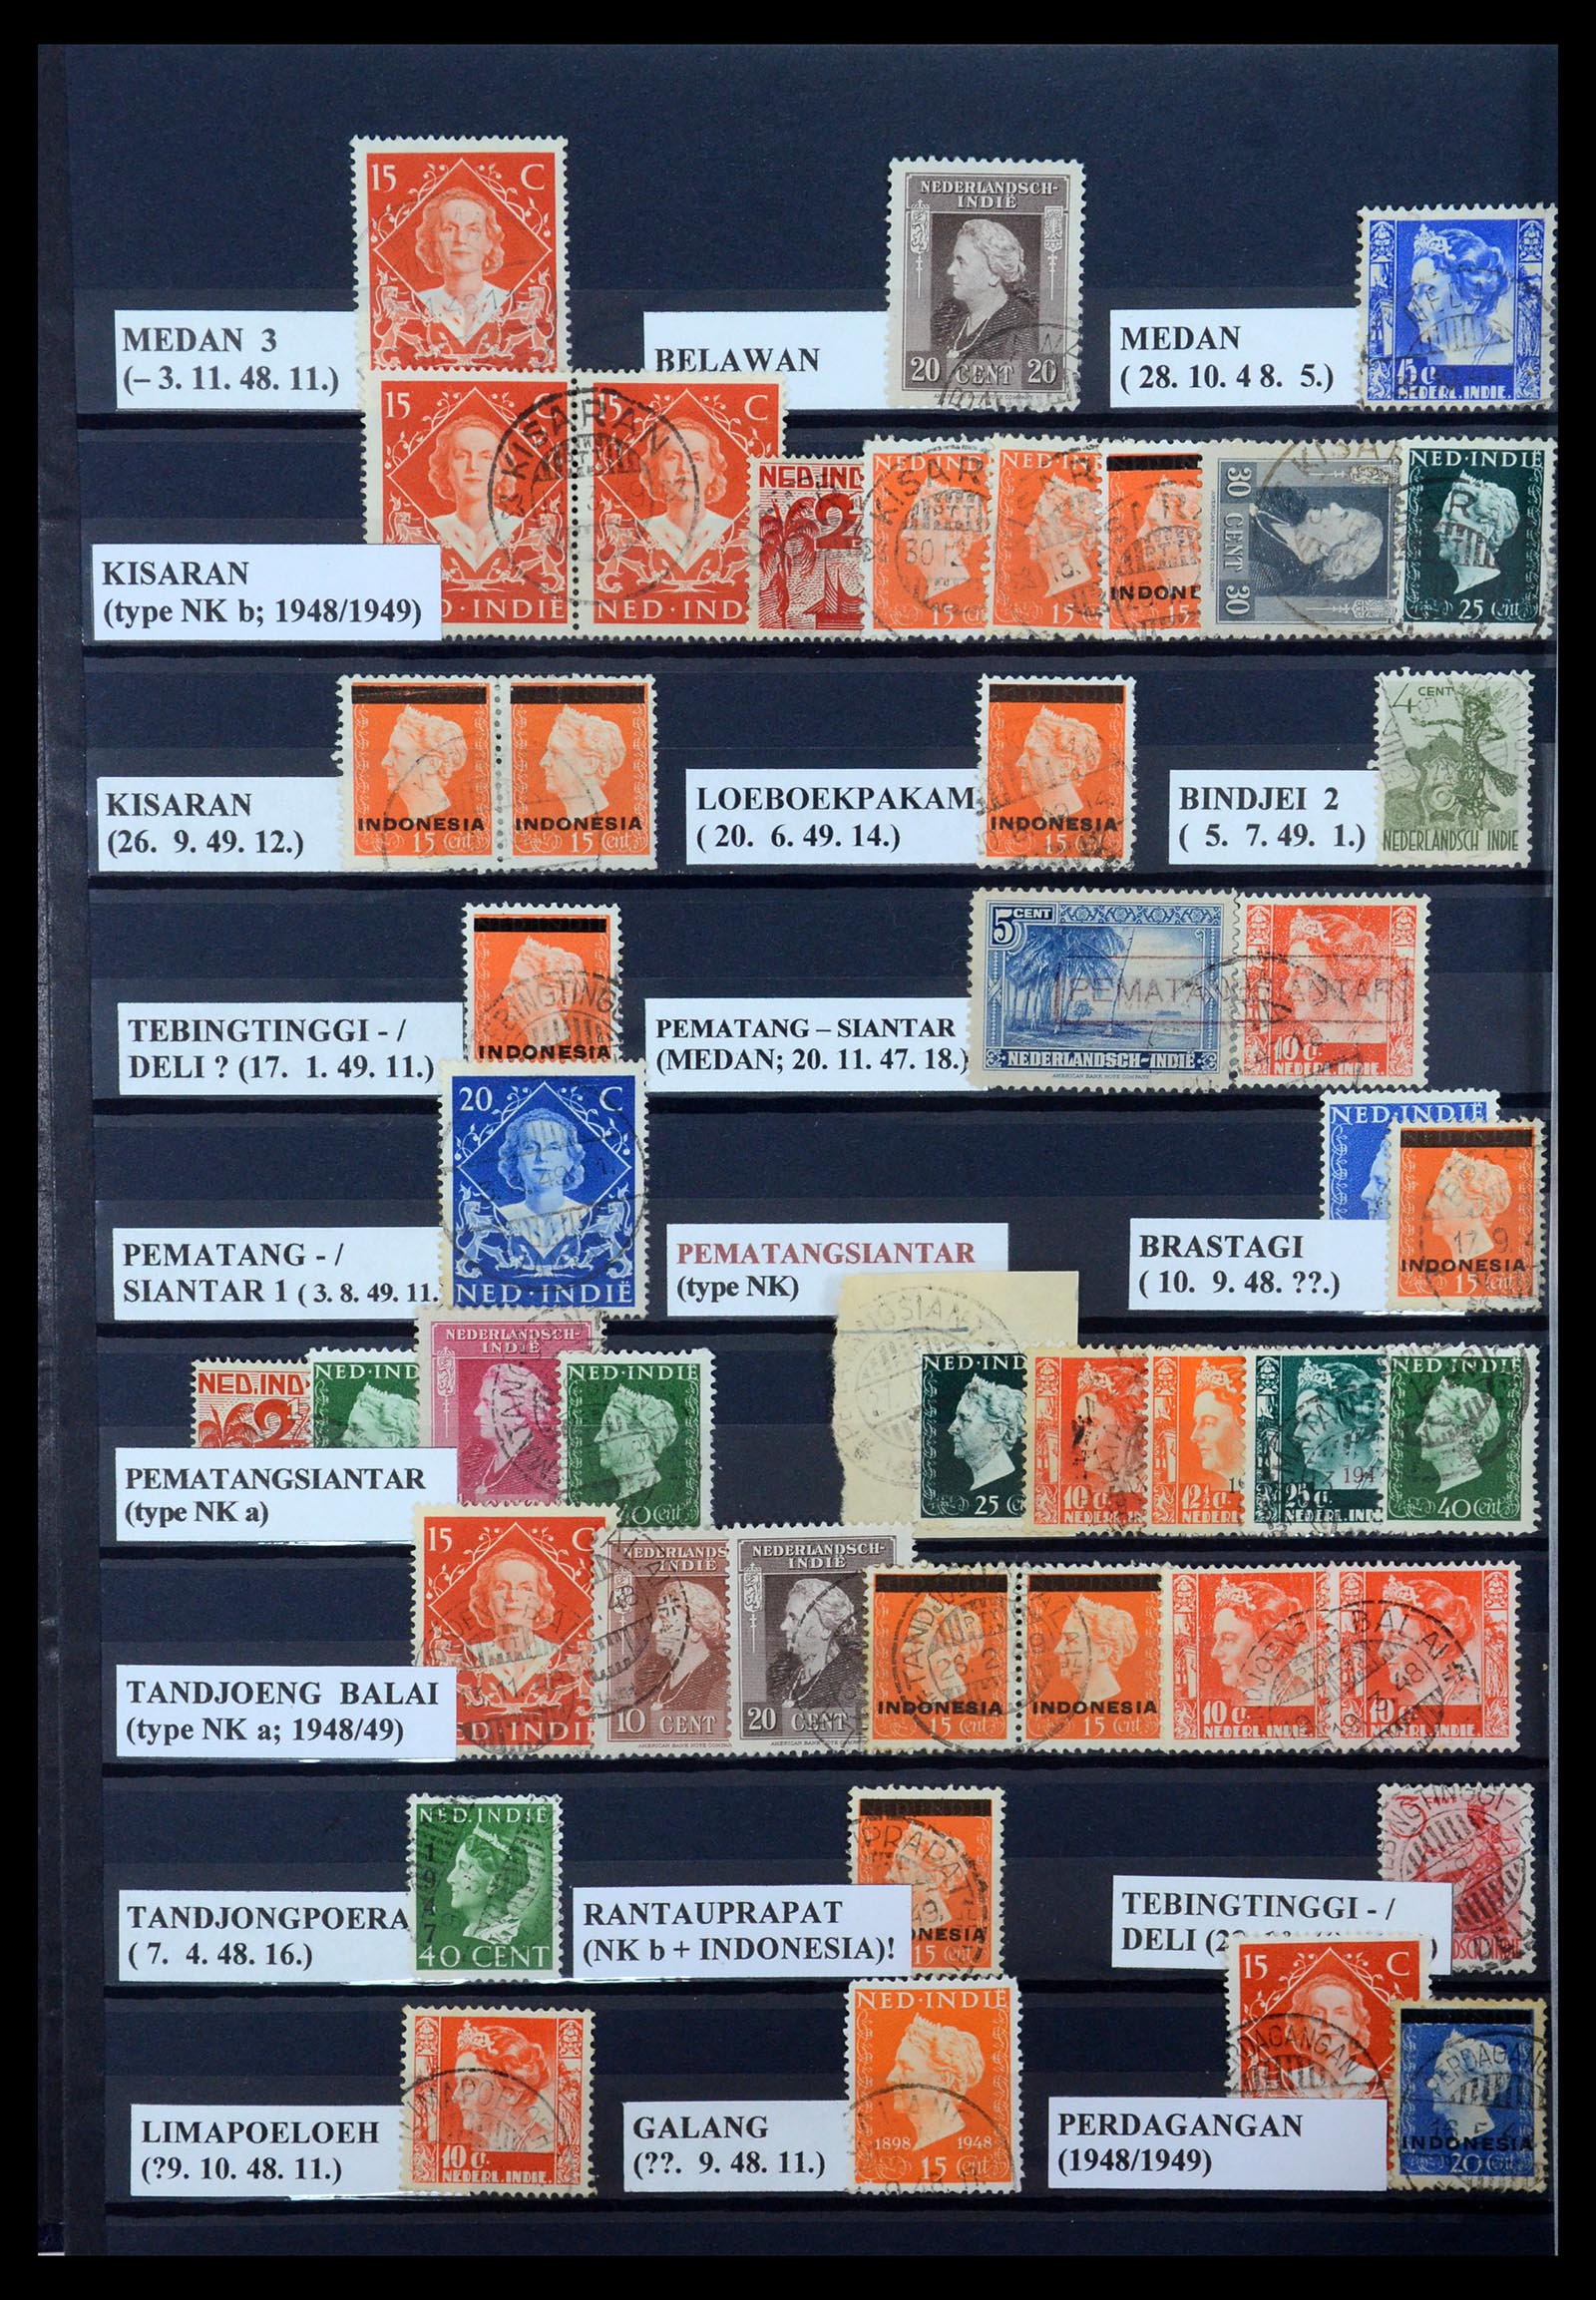 35612 024 - Stamp Collection 35612 Dutch east Indies cancels.